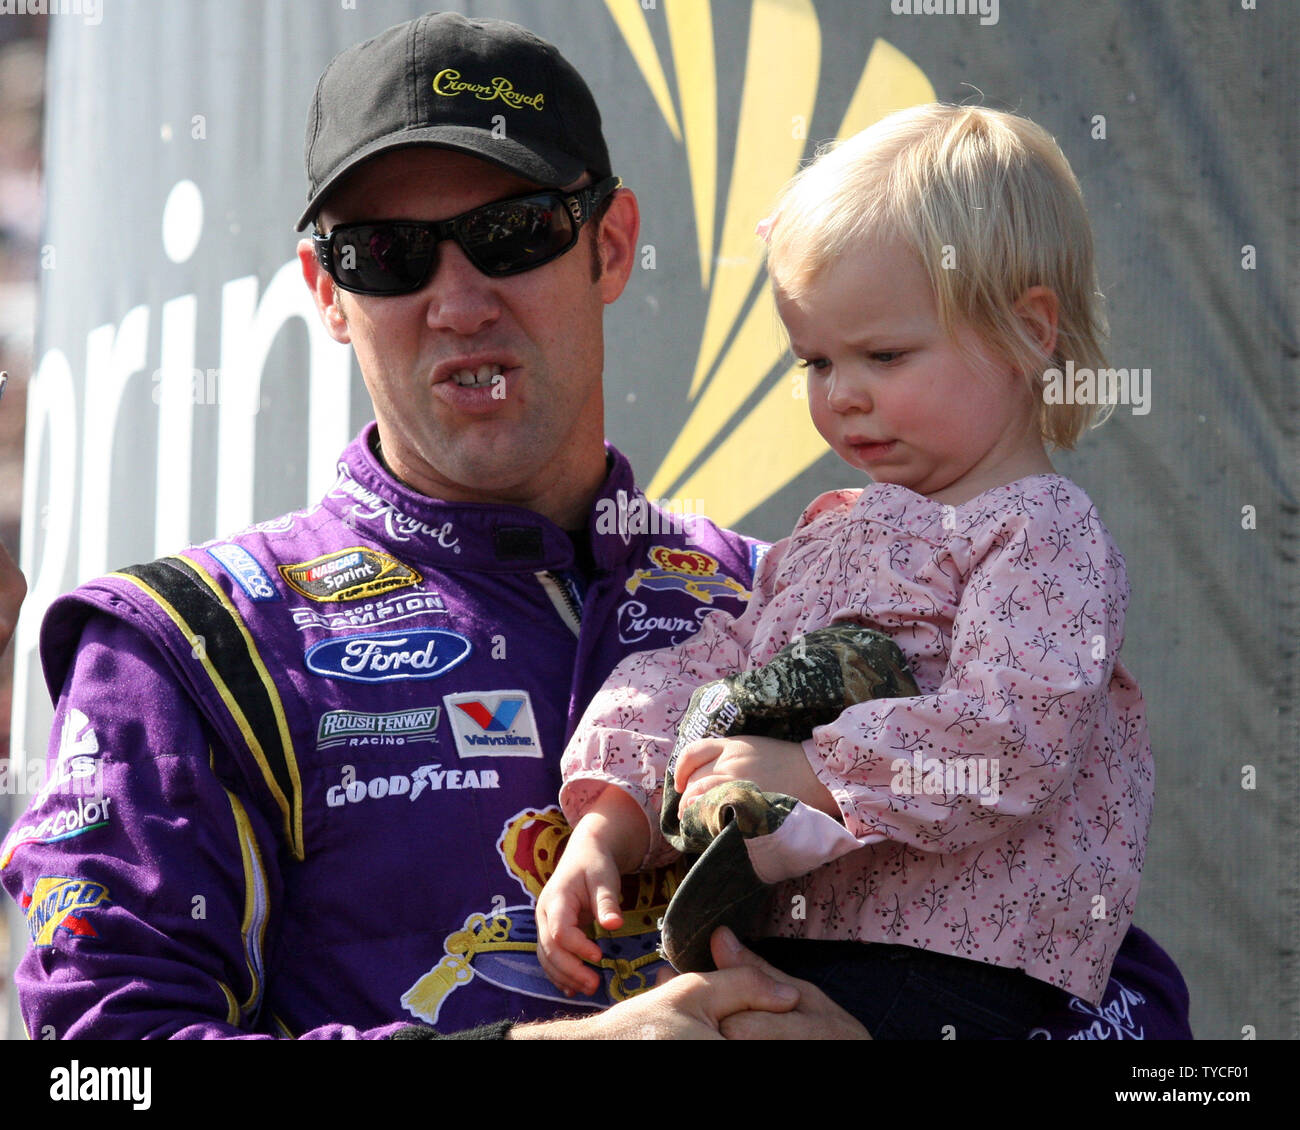 Matt Kenseth and his daughter Kaylin Nicola Kenseth, wait back stage for the start of driver introductions for the NASCAR Sprint Cup Series Sylvania 300 at New Hampshire Motor Speedway in Loudon, New Hampshire on September 25, 2011.  UPI/Deborah Hope Stock Photo